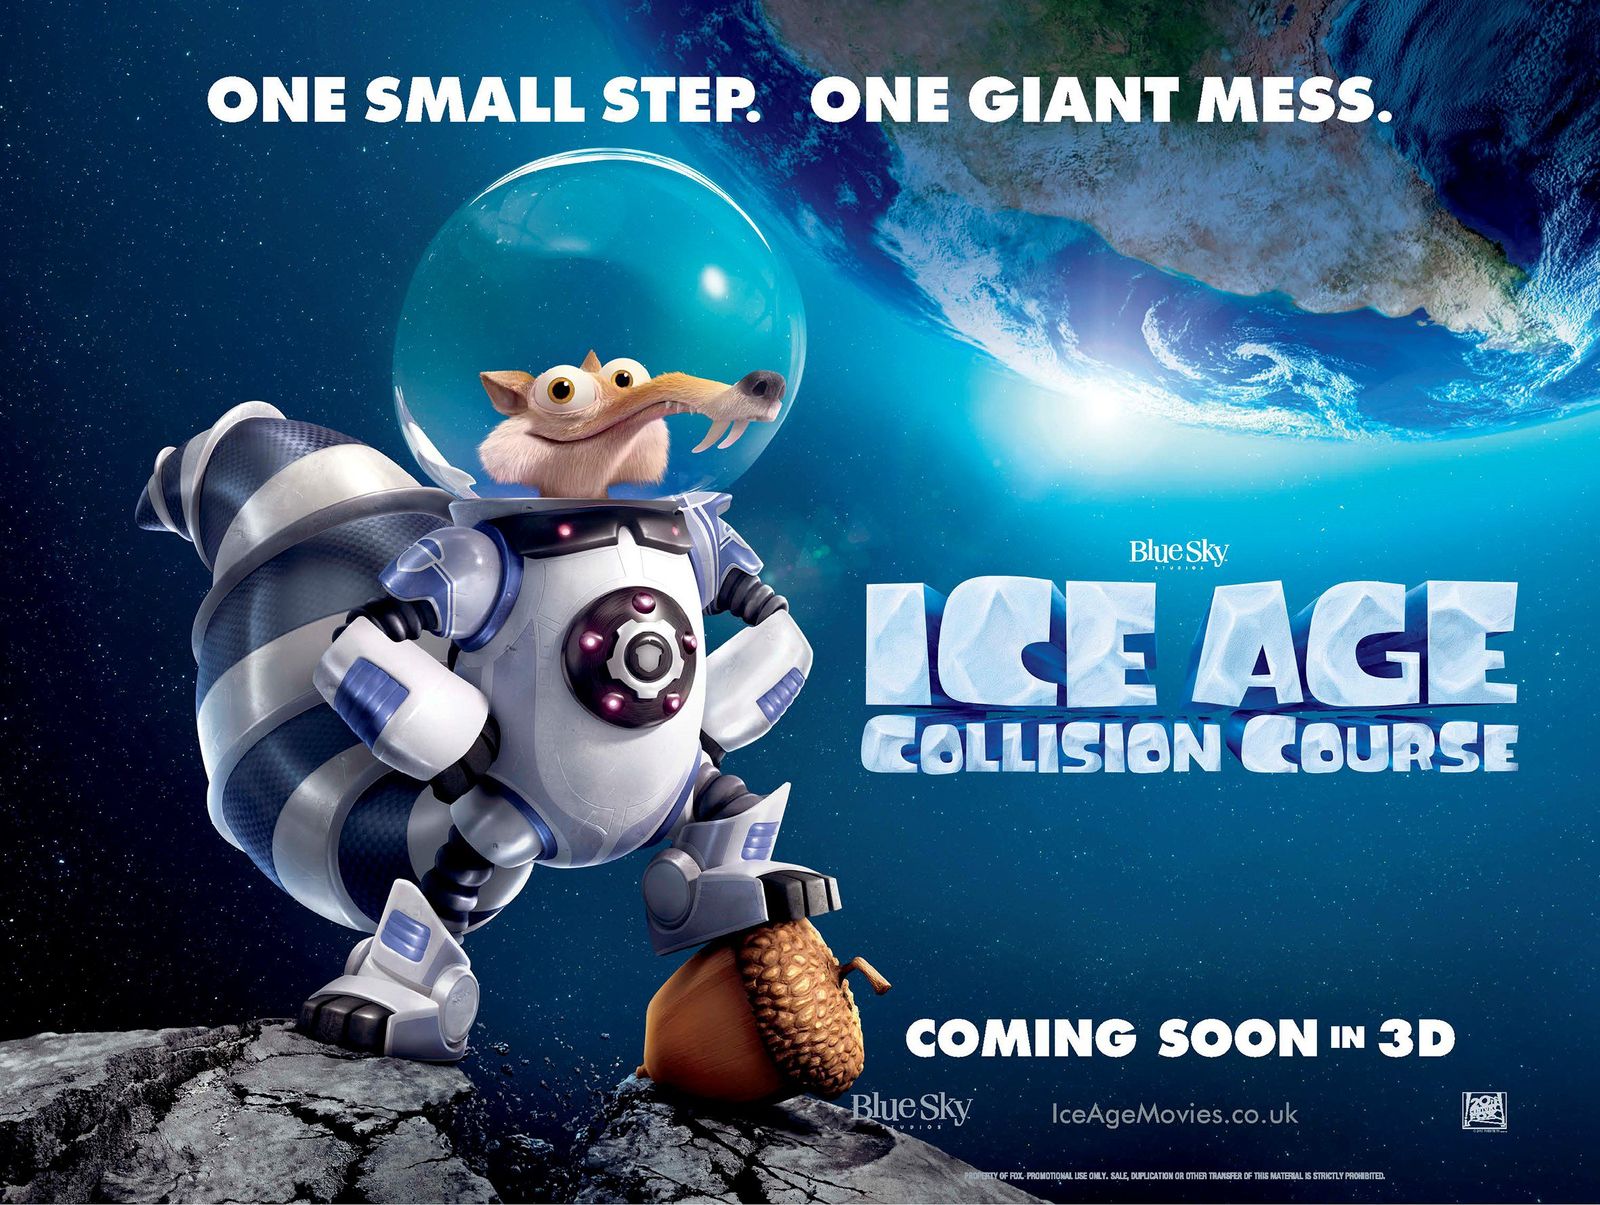 New Ice Age: Collision Course Trailer Released